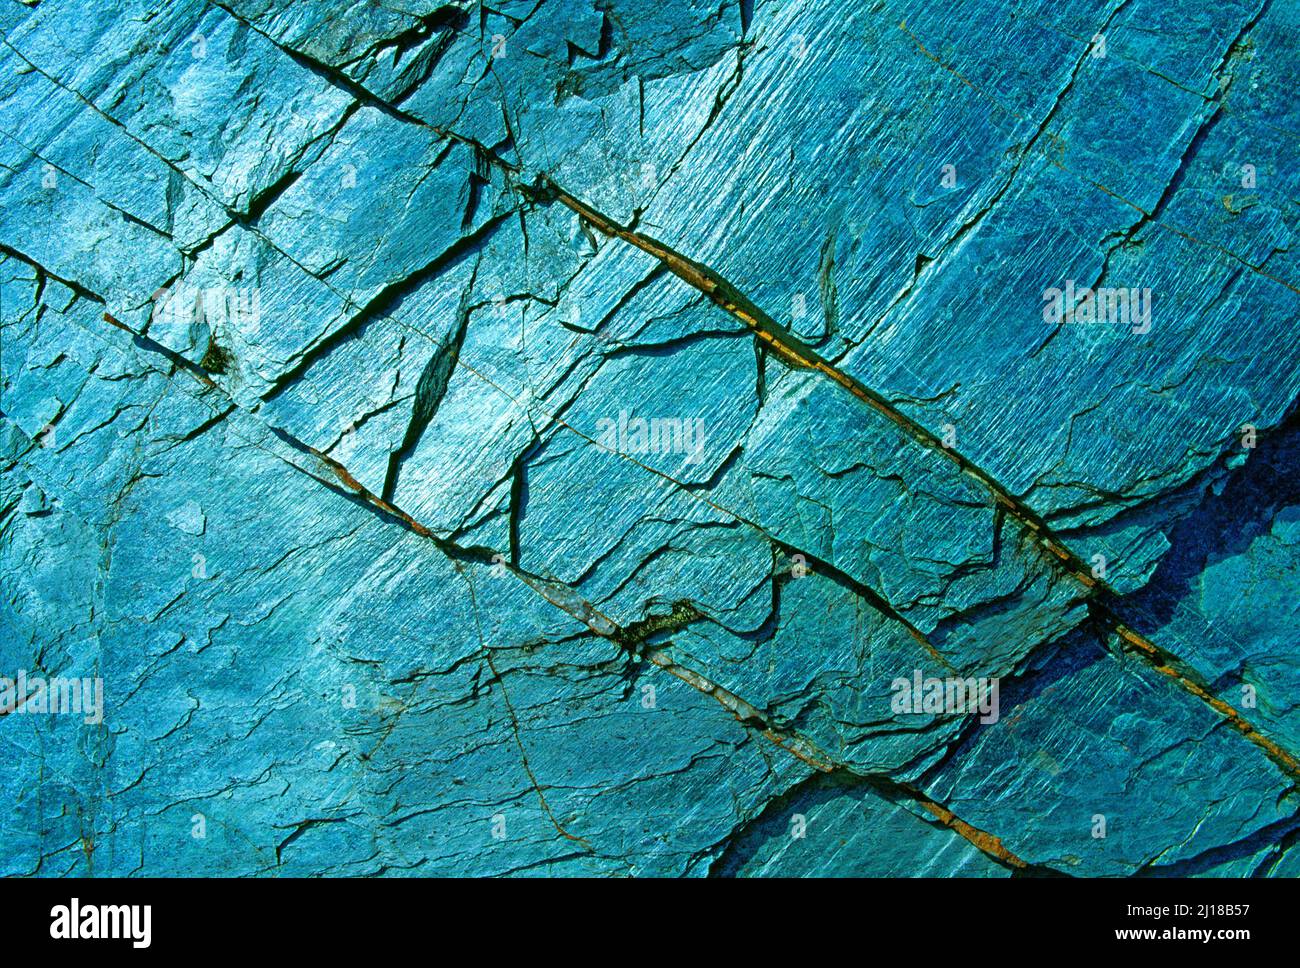 rock formation, Stock Photo